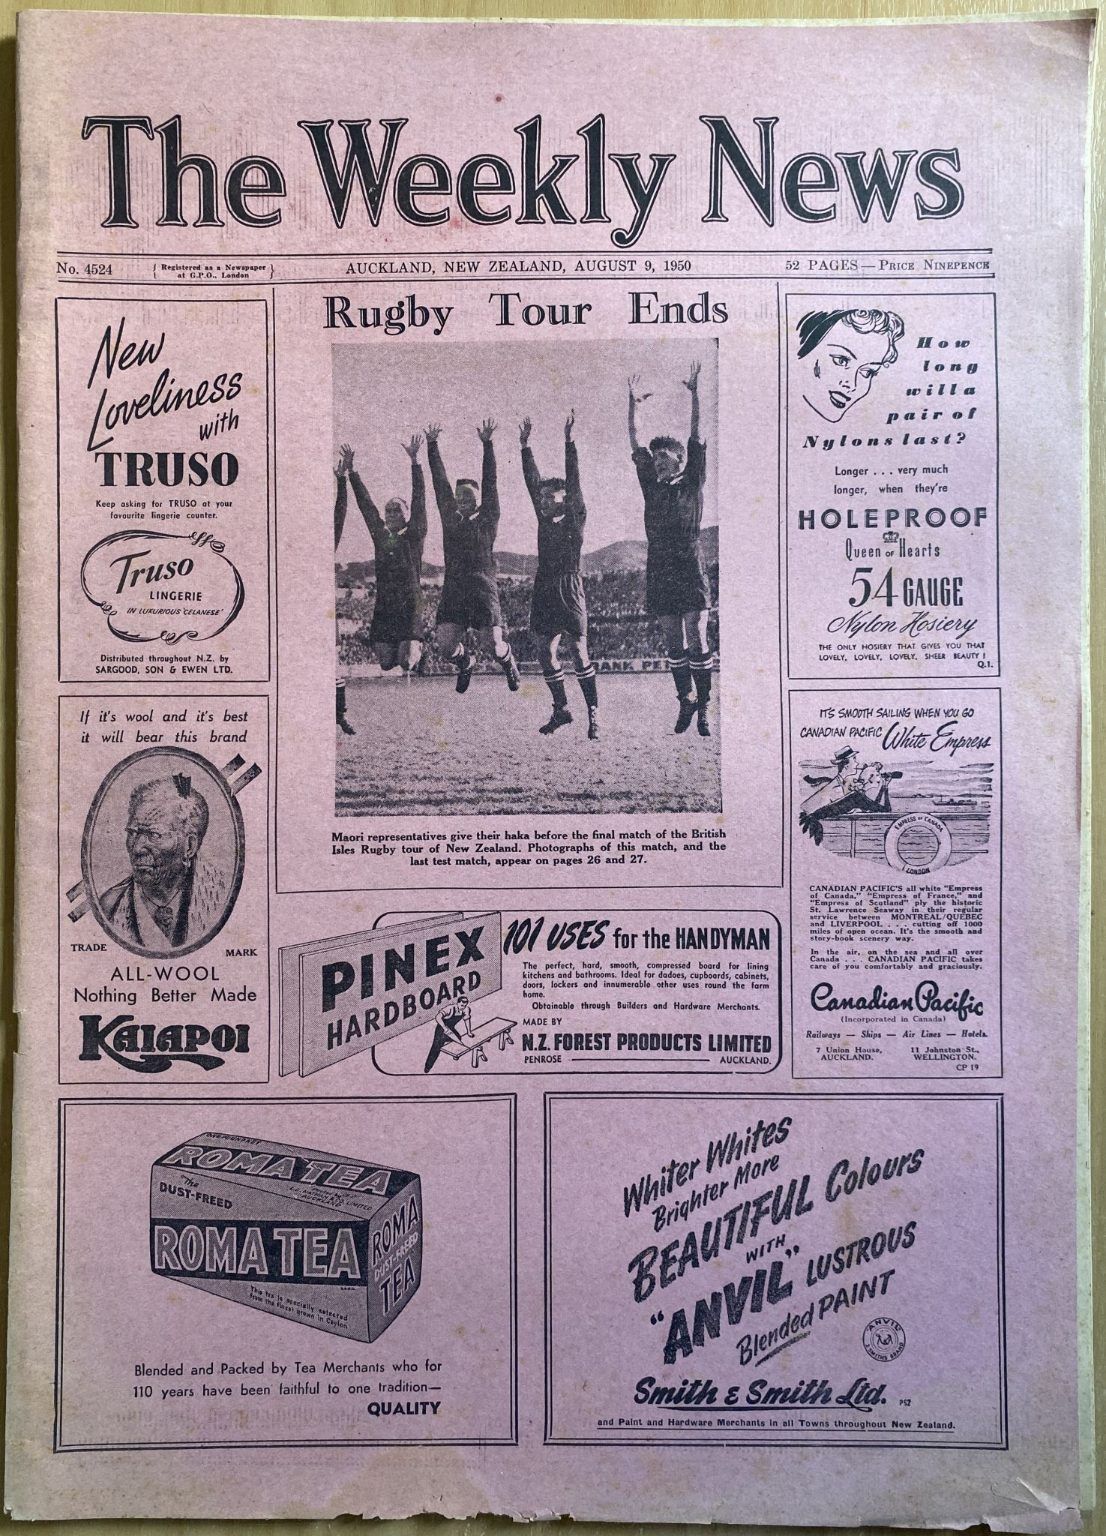 OLD NEWSPAPER: The Weekly News, No. 4524, 9 August 1950